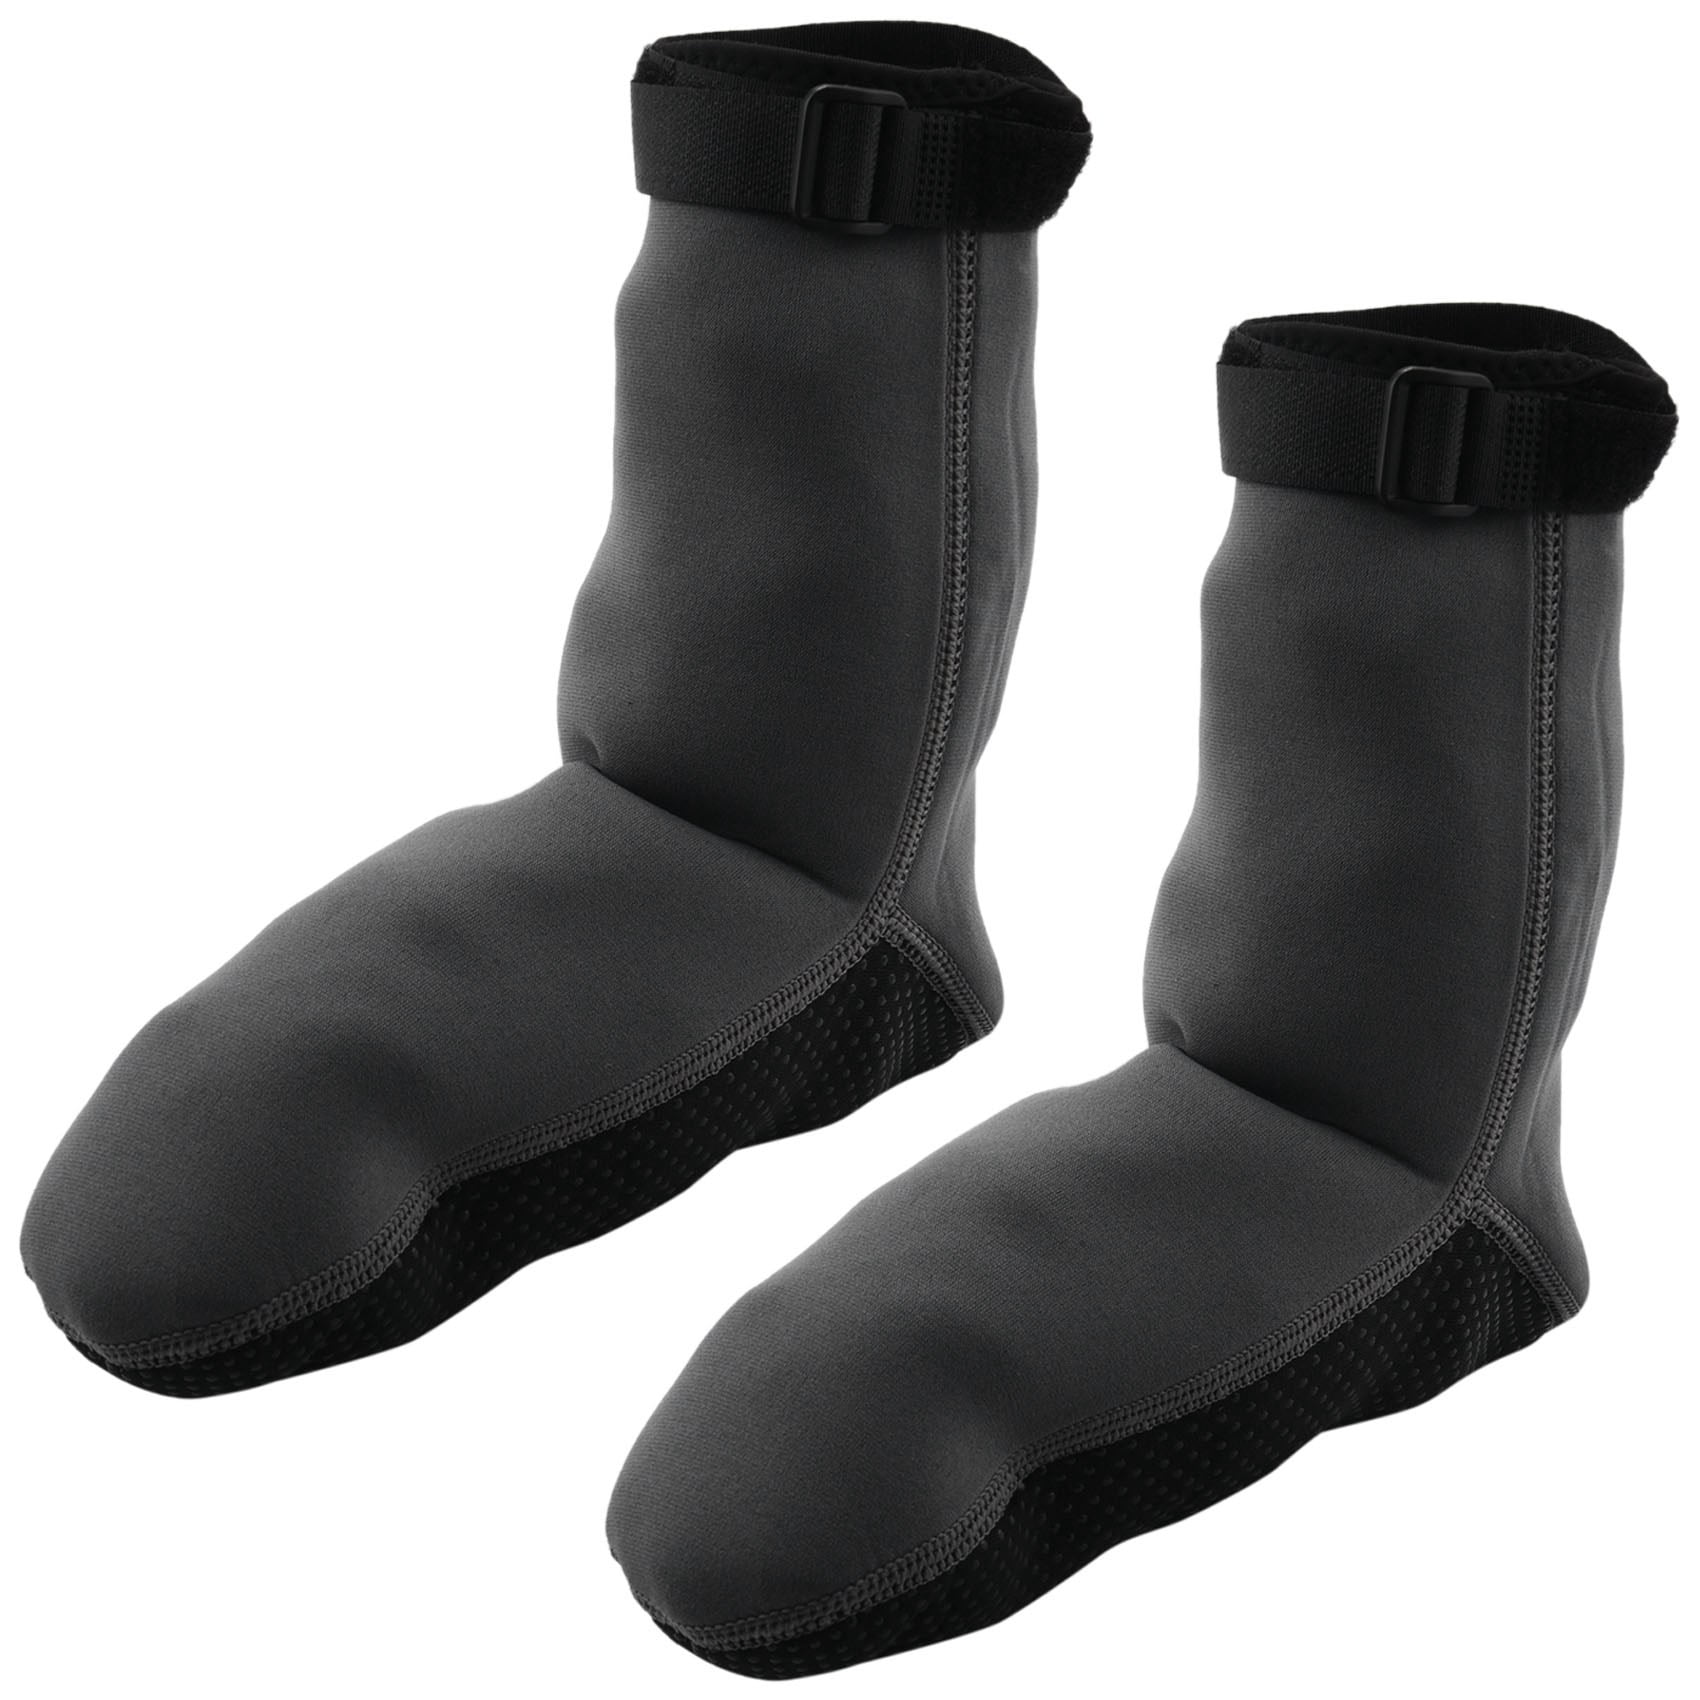 Neoprene Diving Socks Boots Non-Slip Beach Boots Wetsuit Shoes ...